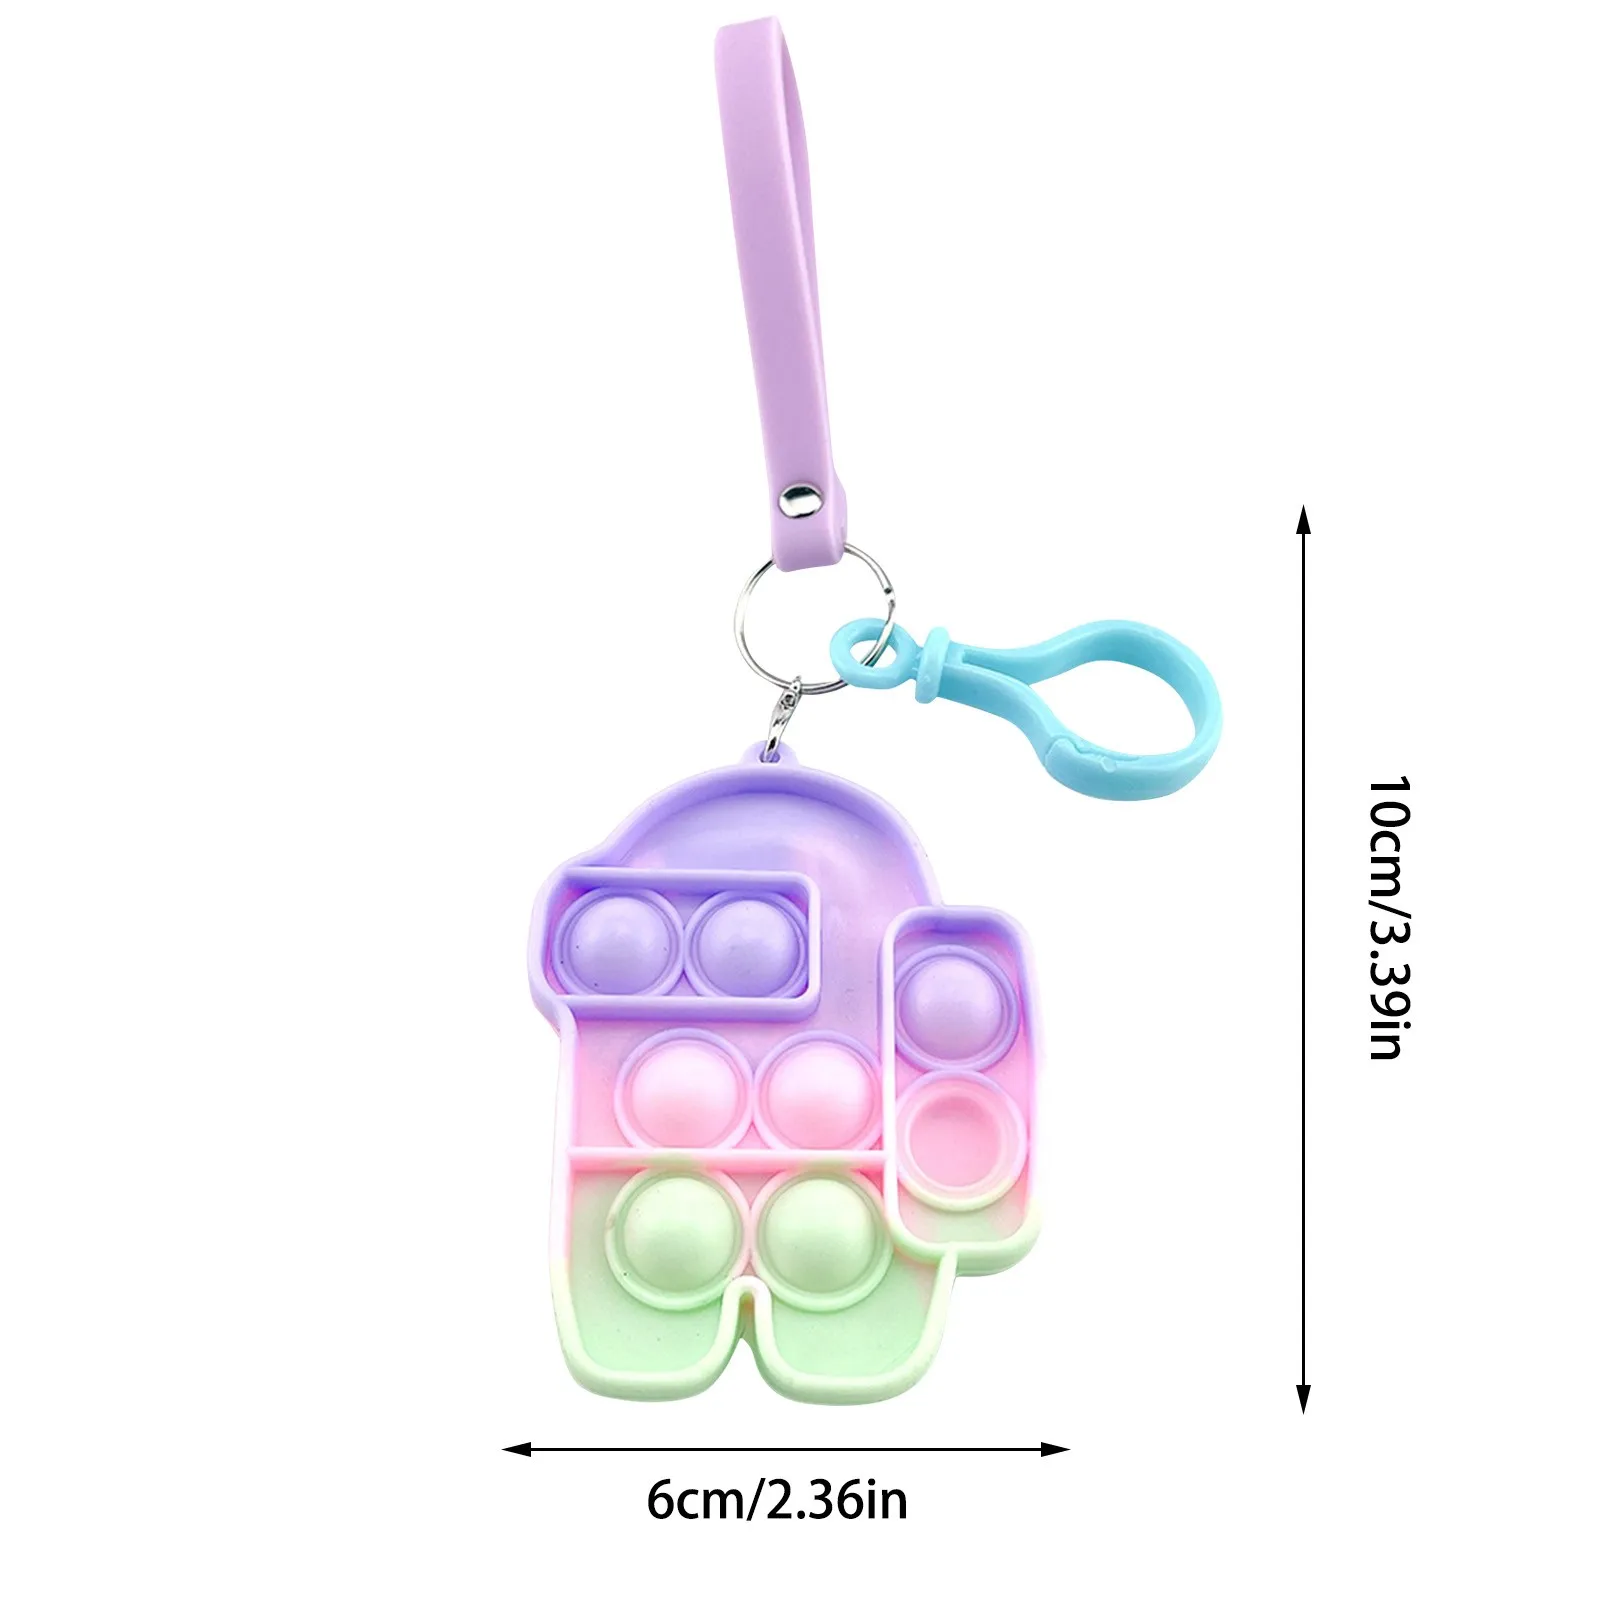 Mini Pops Simple Dimple Keychain Its Push Bubble Anxiety Sensory Fidget Toy Anti Stress Relief For Autism Adults Key Chain Toys squishy mesh ball Squeeze Toys